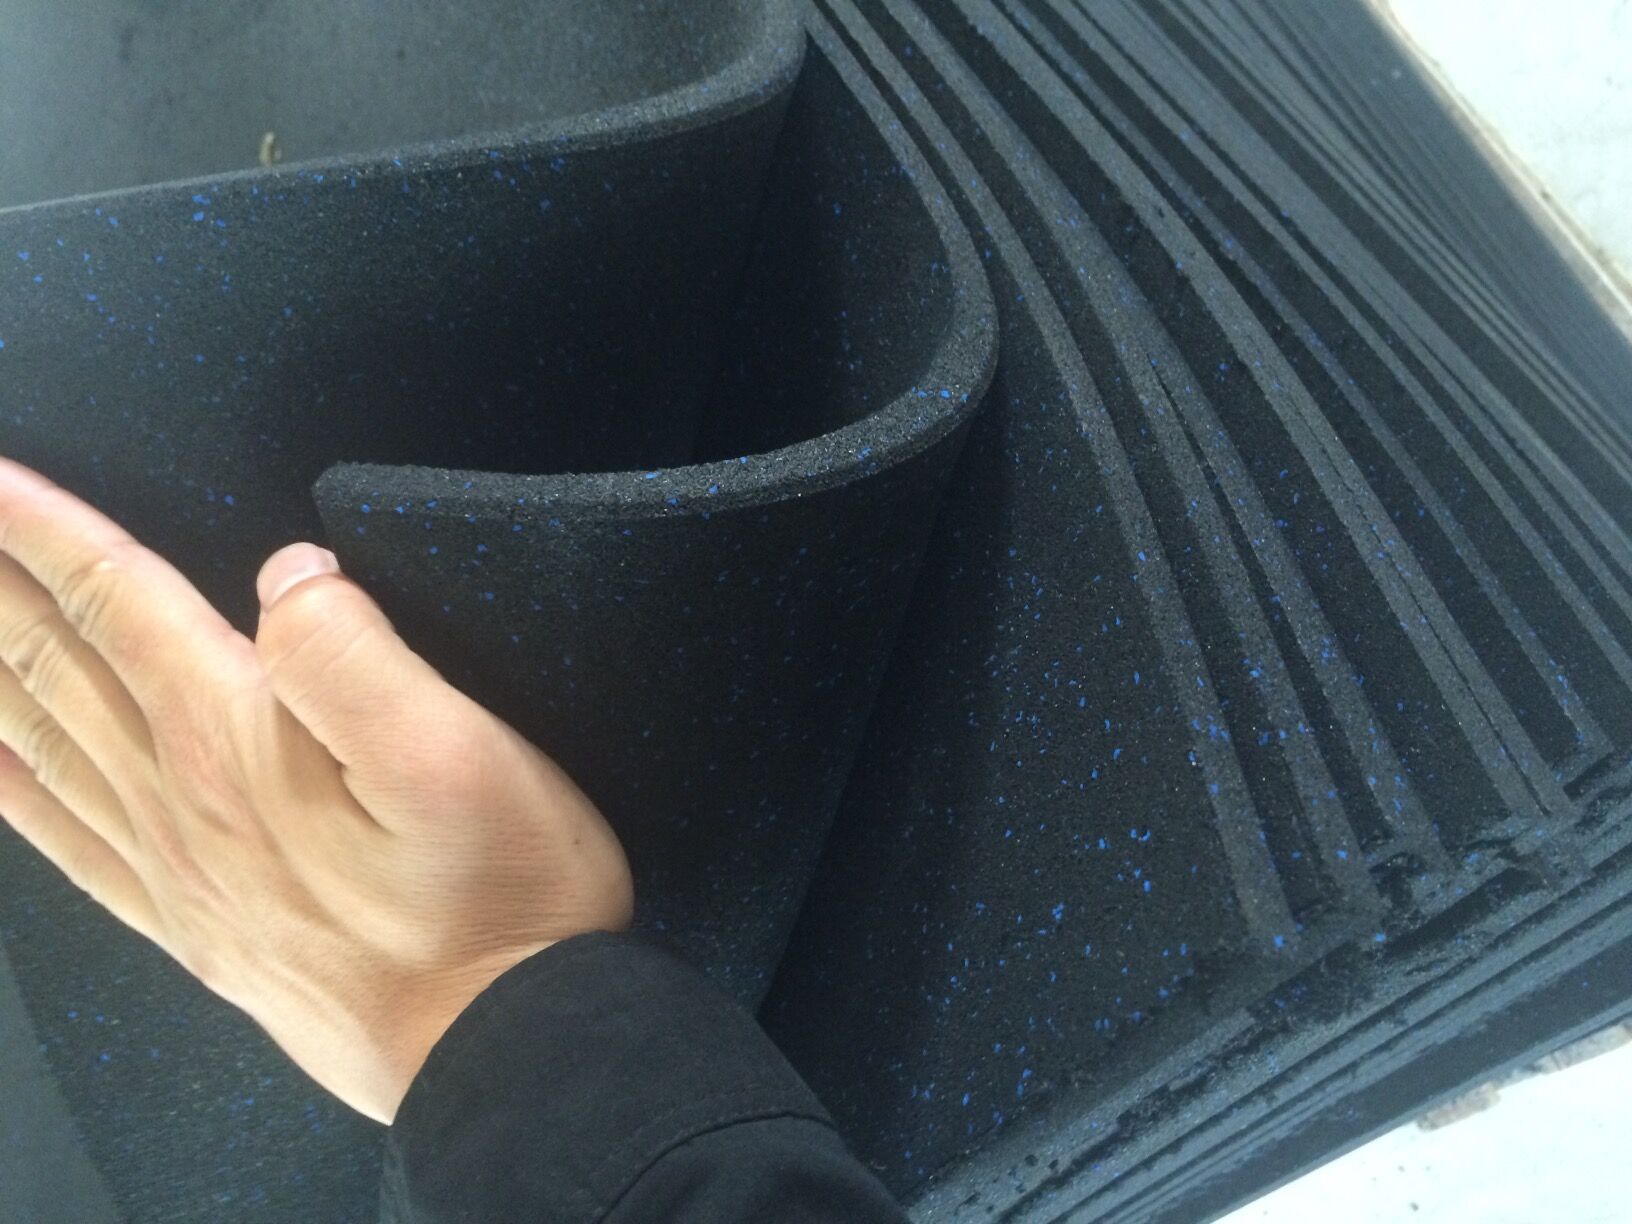 GYM rubber floor mats for fitness